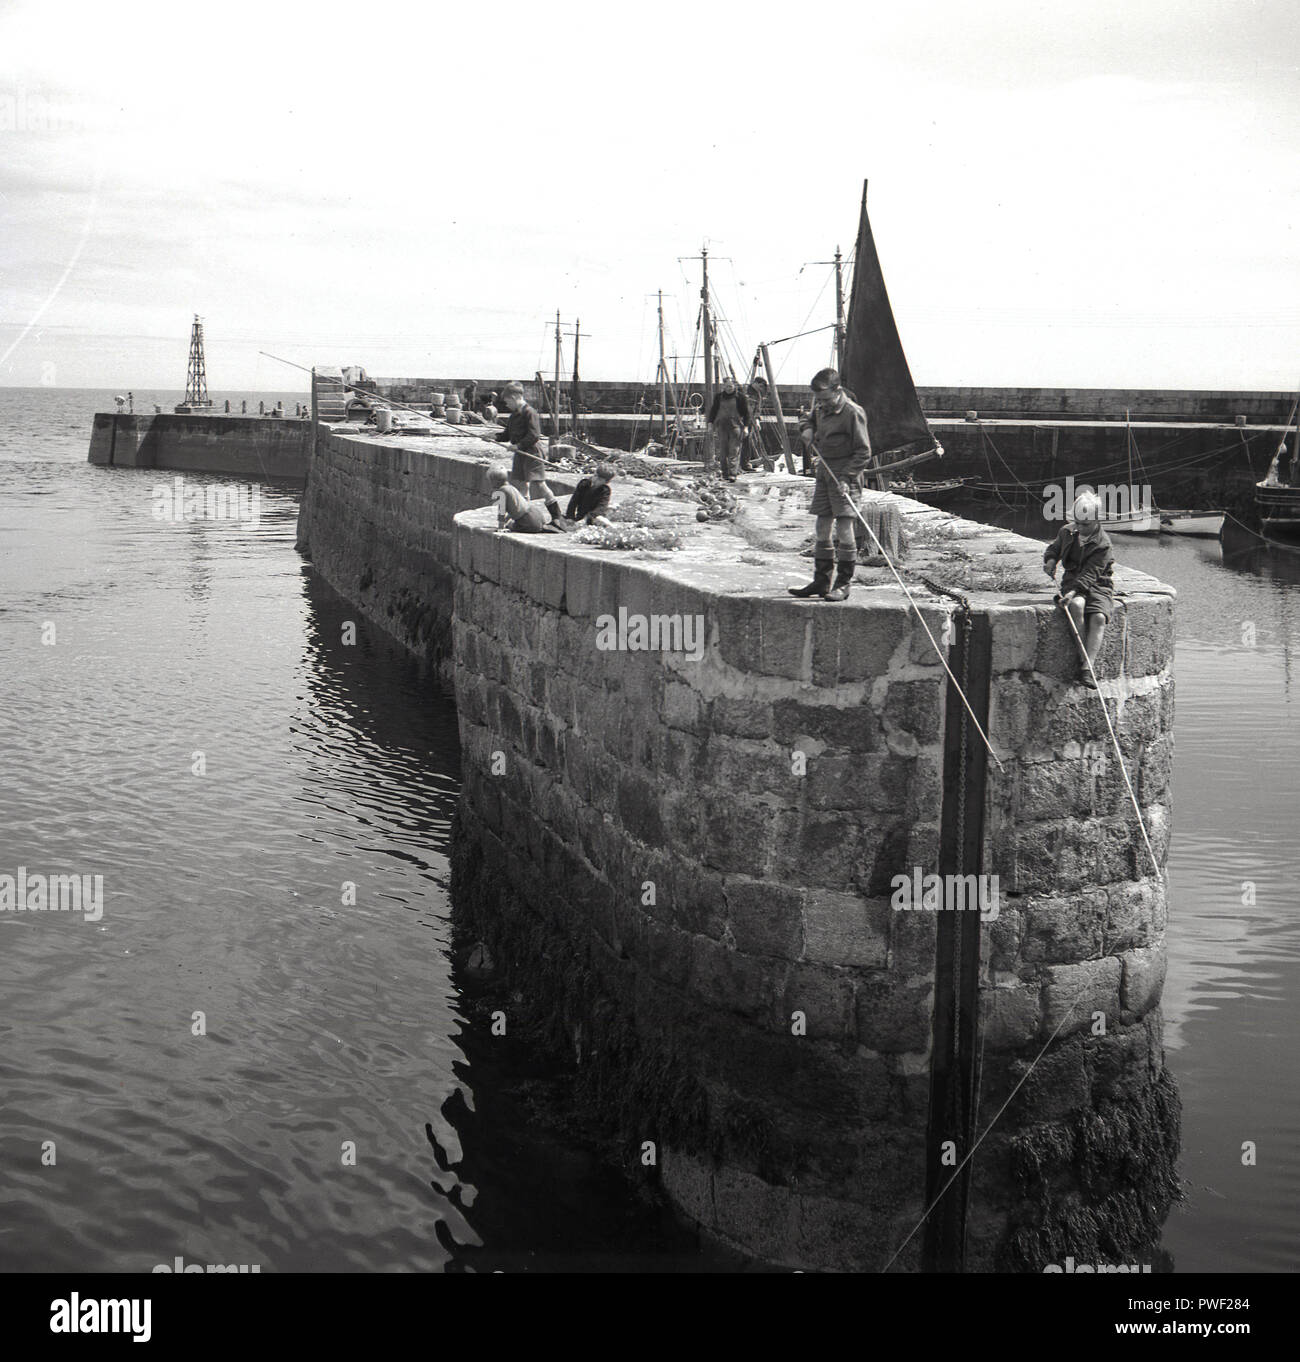 1950s, historical, young children fishing from a sea wall, in a harbour in Northern Ireland, UK. In this era, children had a great deal of freedom to play outside on their own and as can be seen in this picture, a group of boys are happily fishing from a high wall into deep water below without any adult supervision. Stock Photo